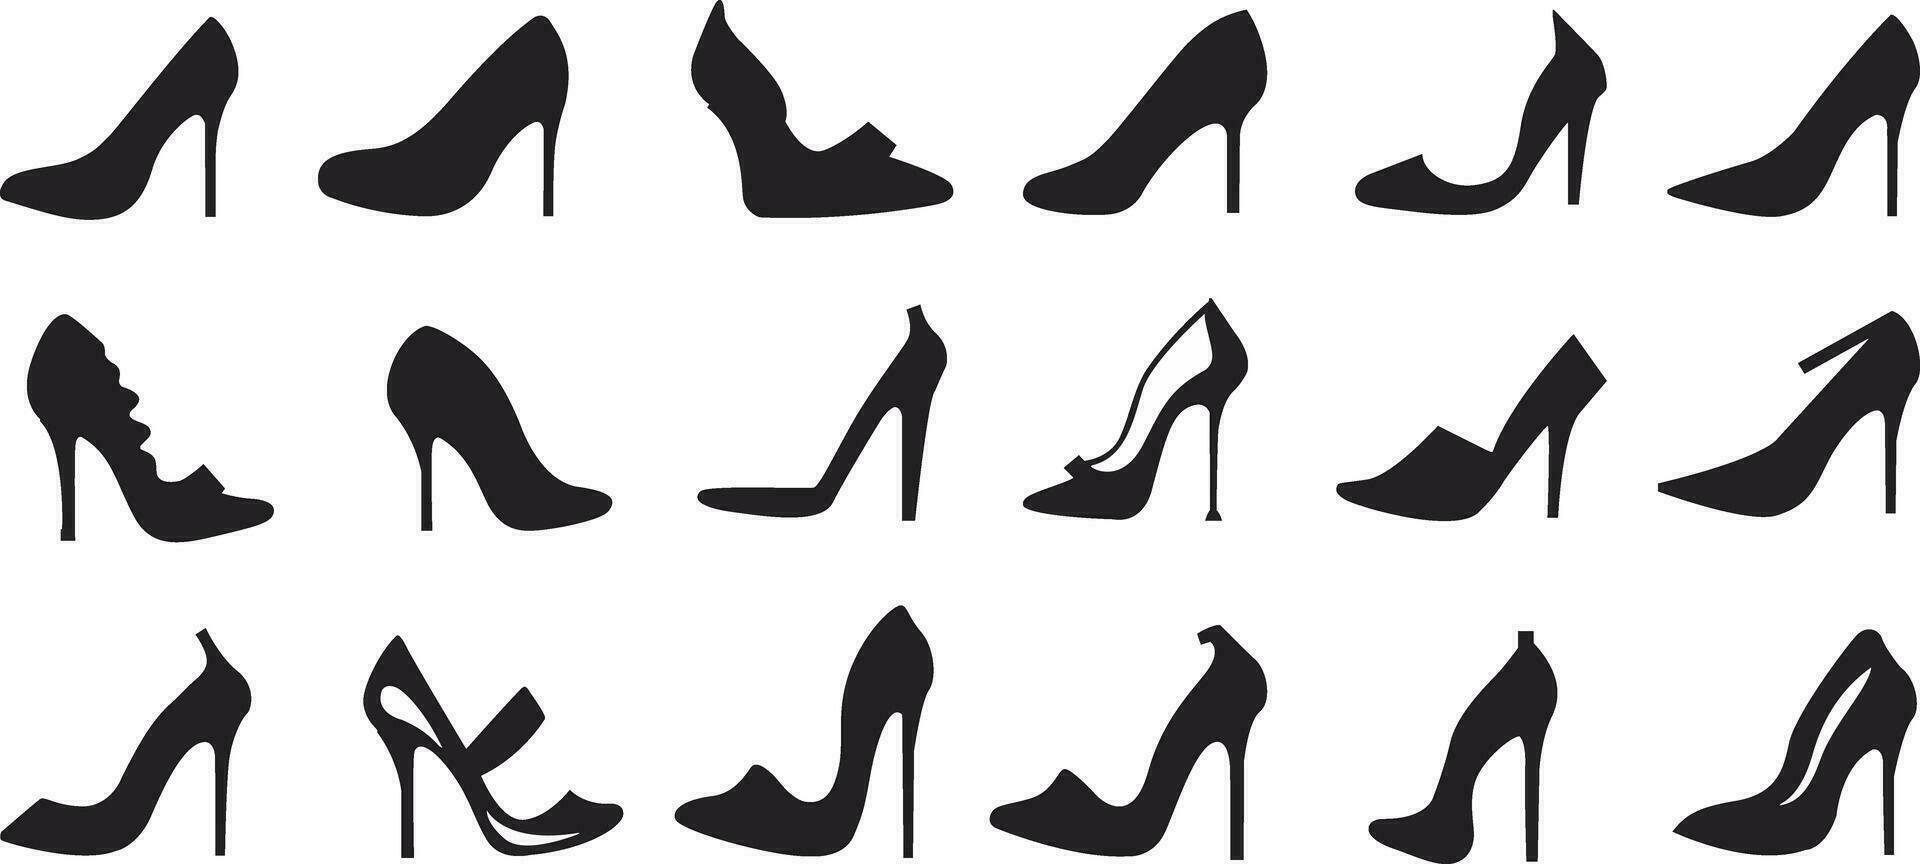 Woman shoe silhouettes. High heel silhouettes. Woman shoe icons. High heel icons set. Vector illustration